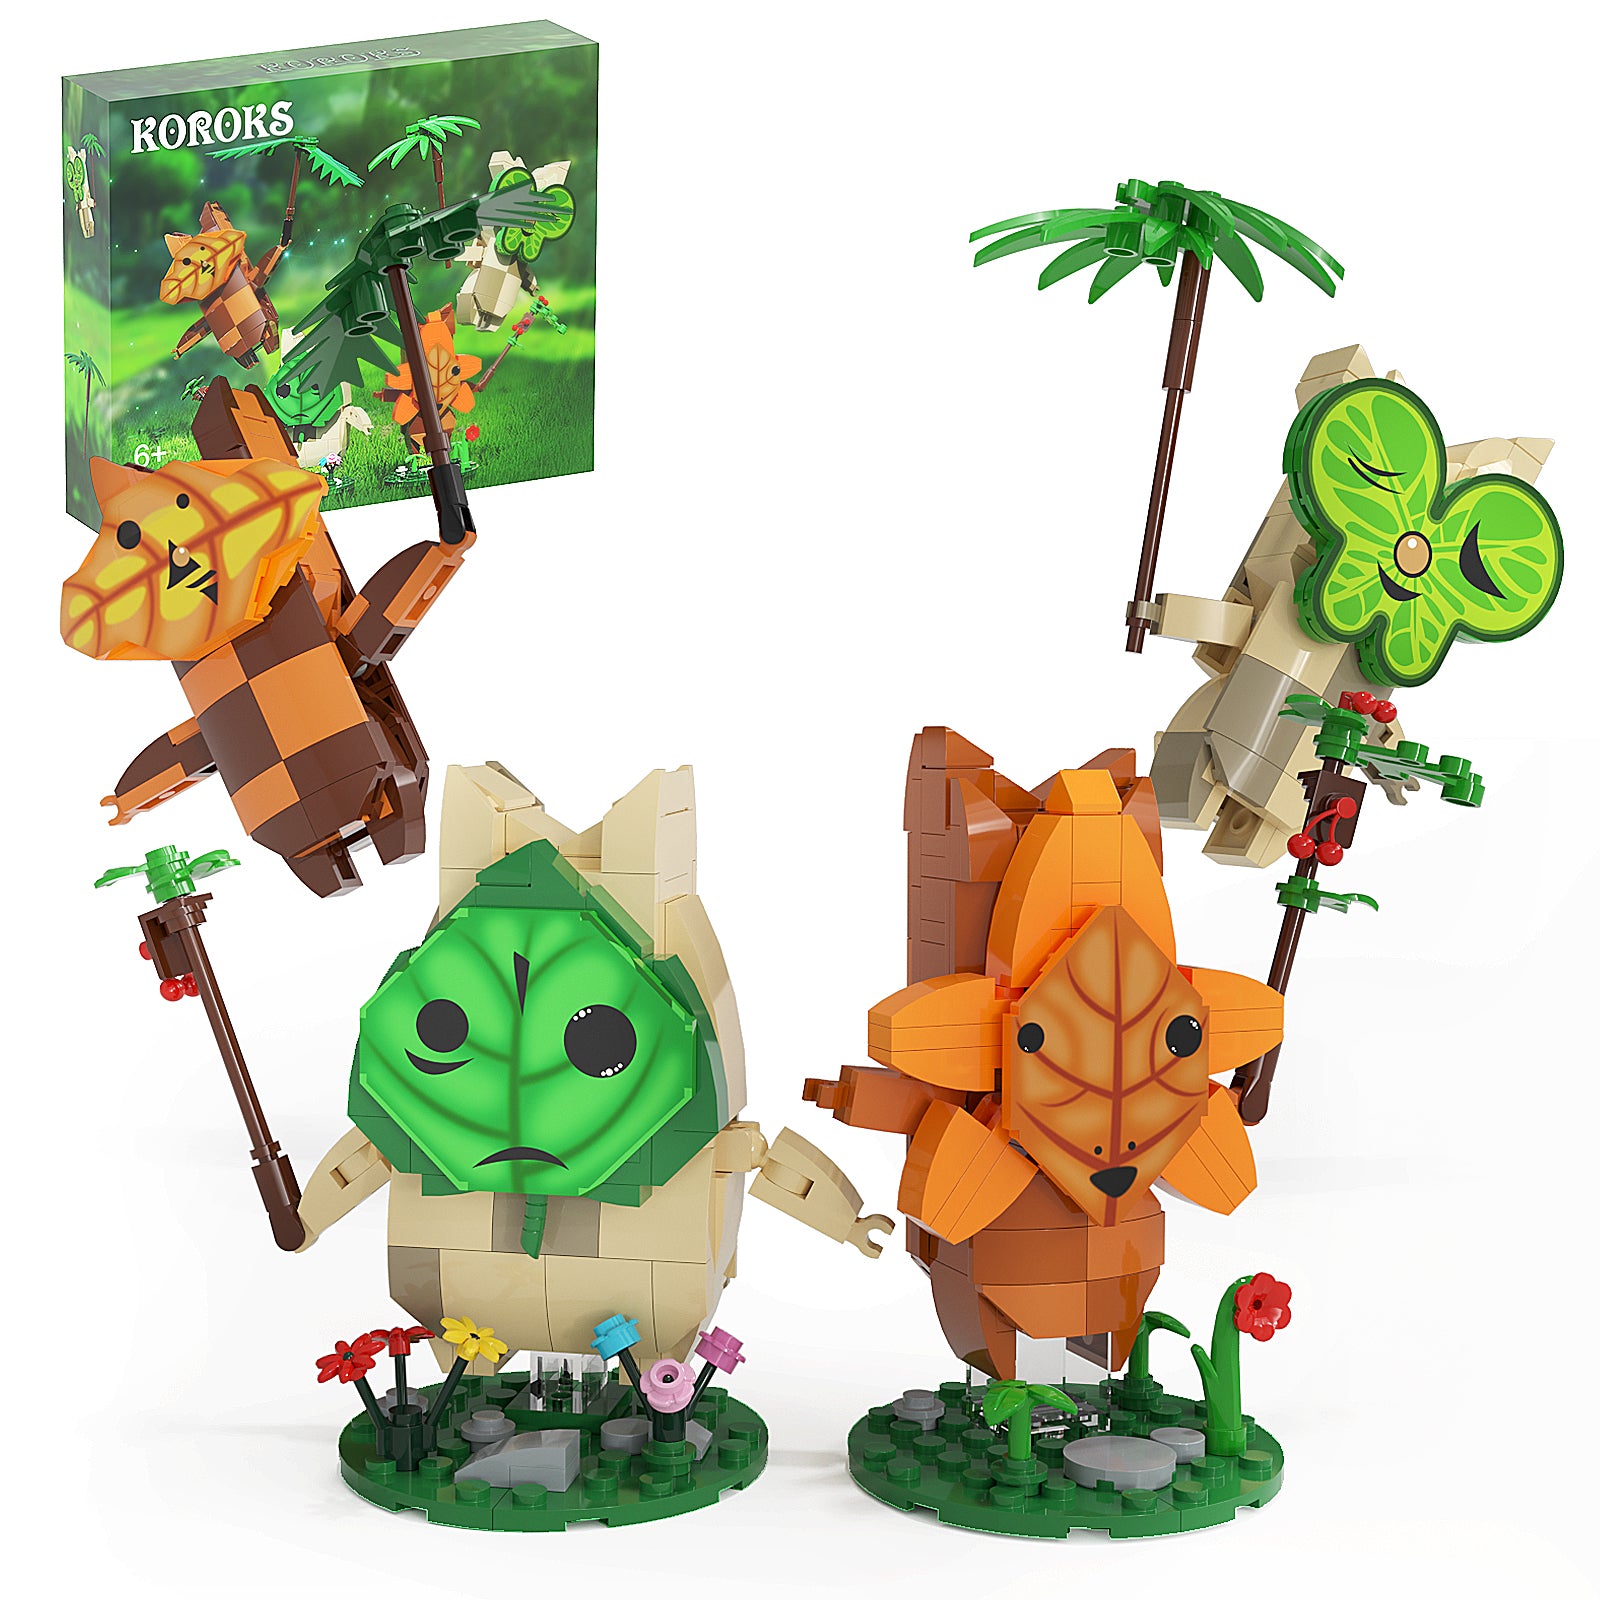 Adorable Zelda Korok Merch Has Just Launched In Japan, And We Need It All  Right Now